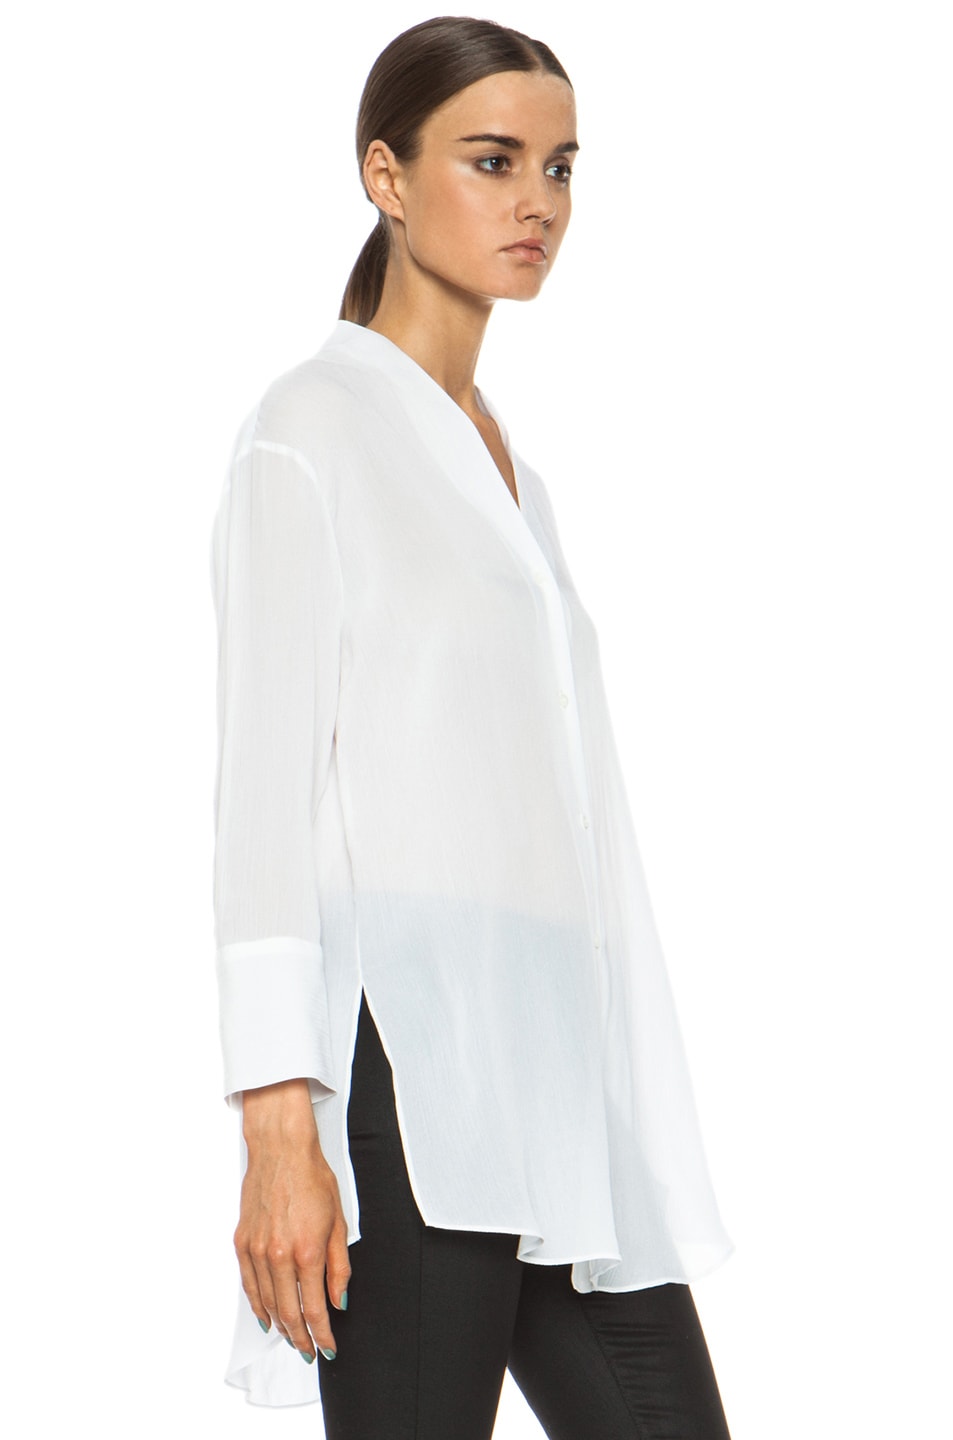 Helmut Lang Mist Oversized Viscose Button Down in Optic White | FWRD